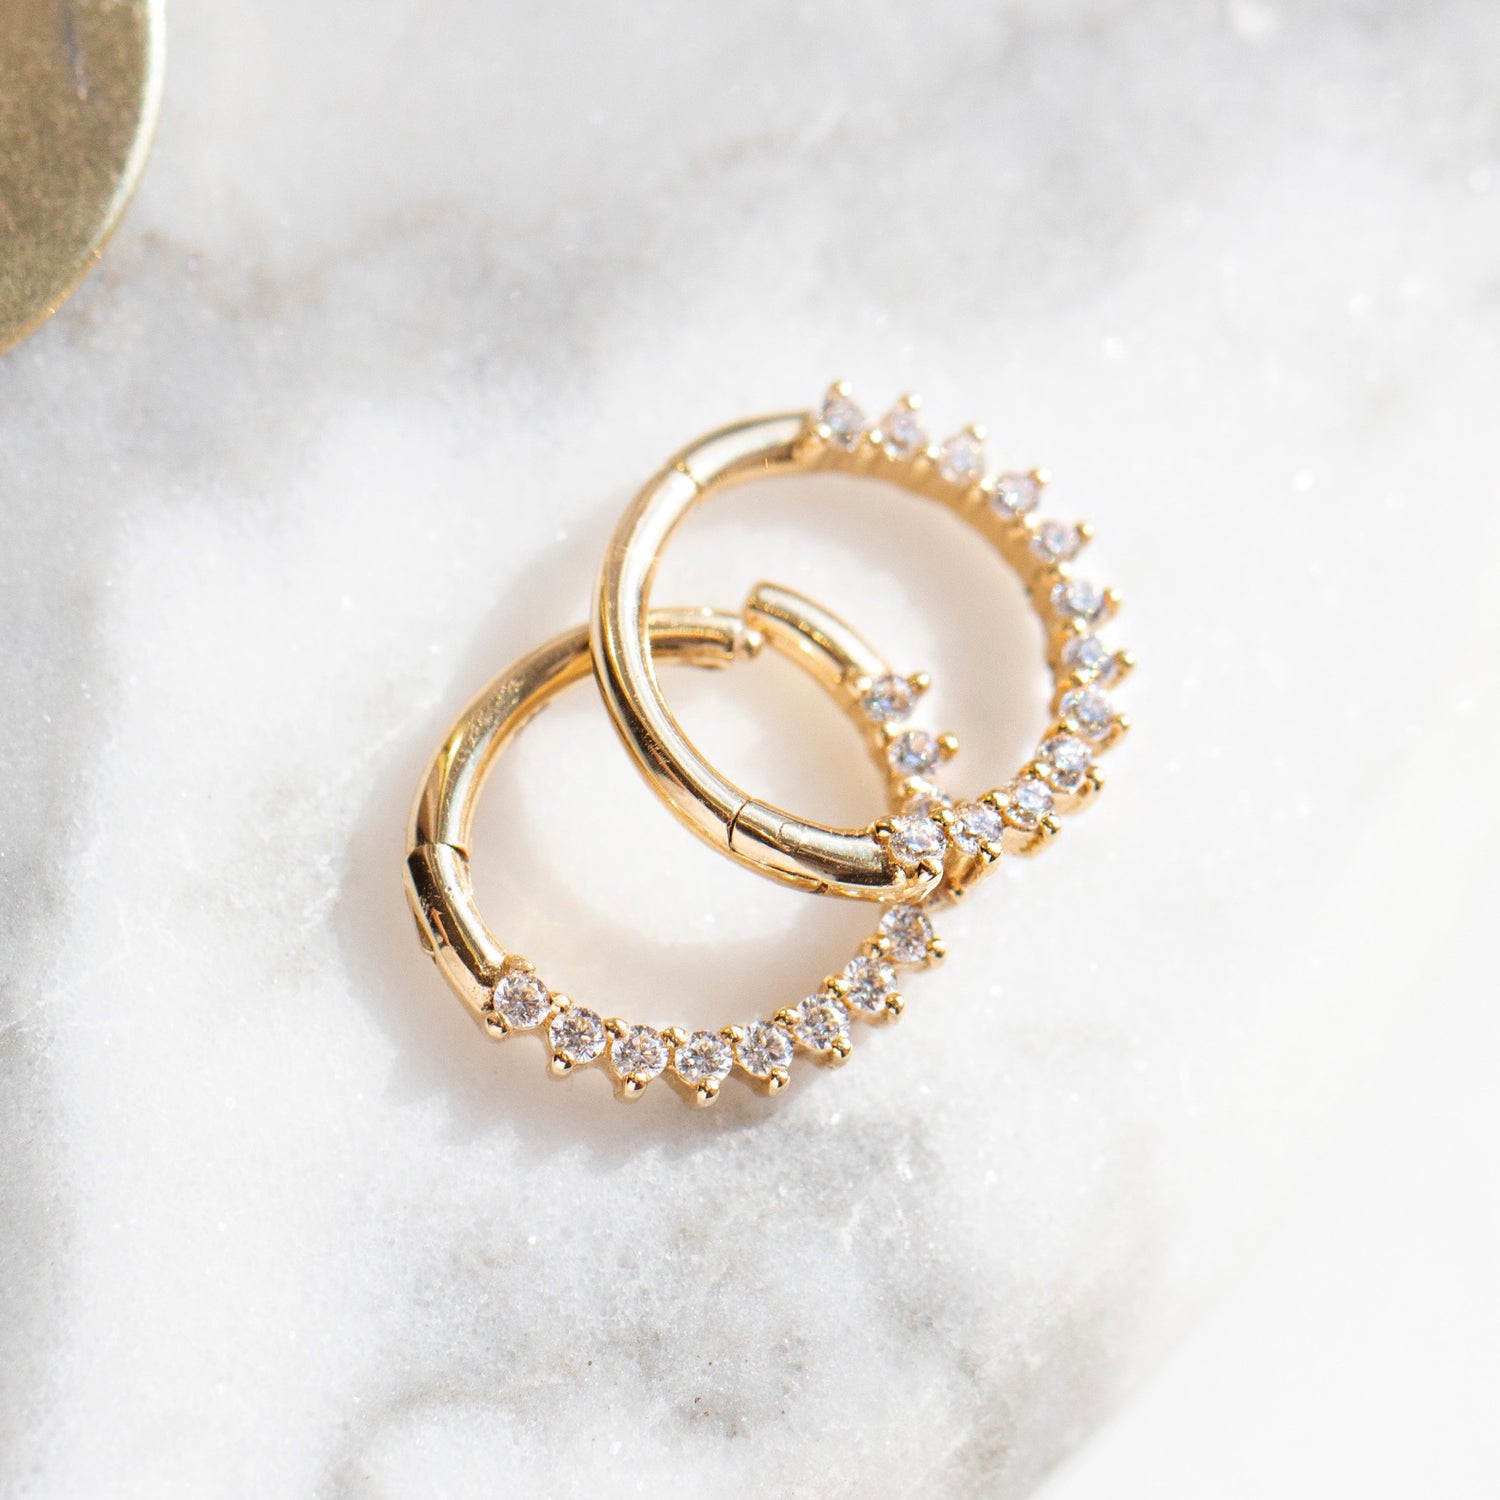 Meaningful solid gold earrings crafted by Carrie Elizabeth Jewellery 